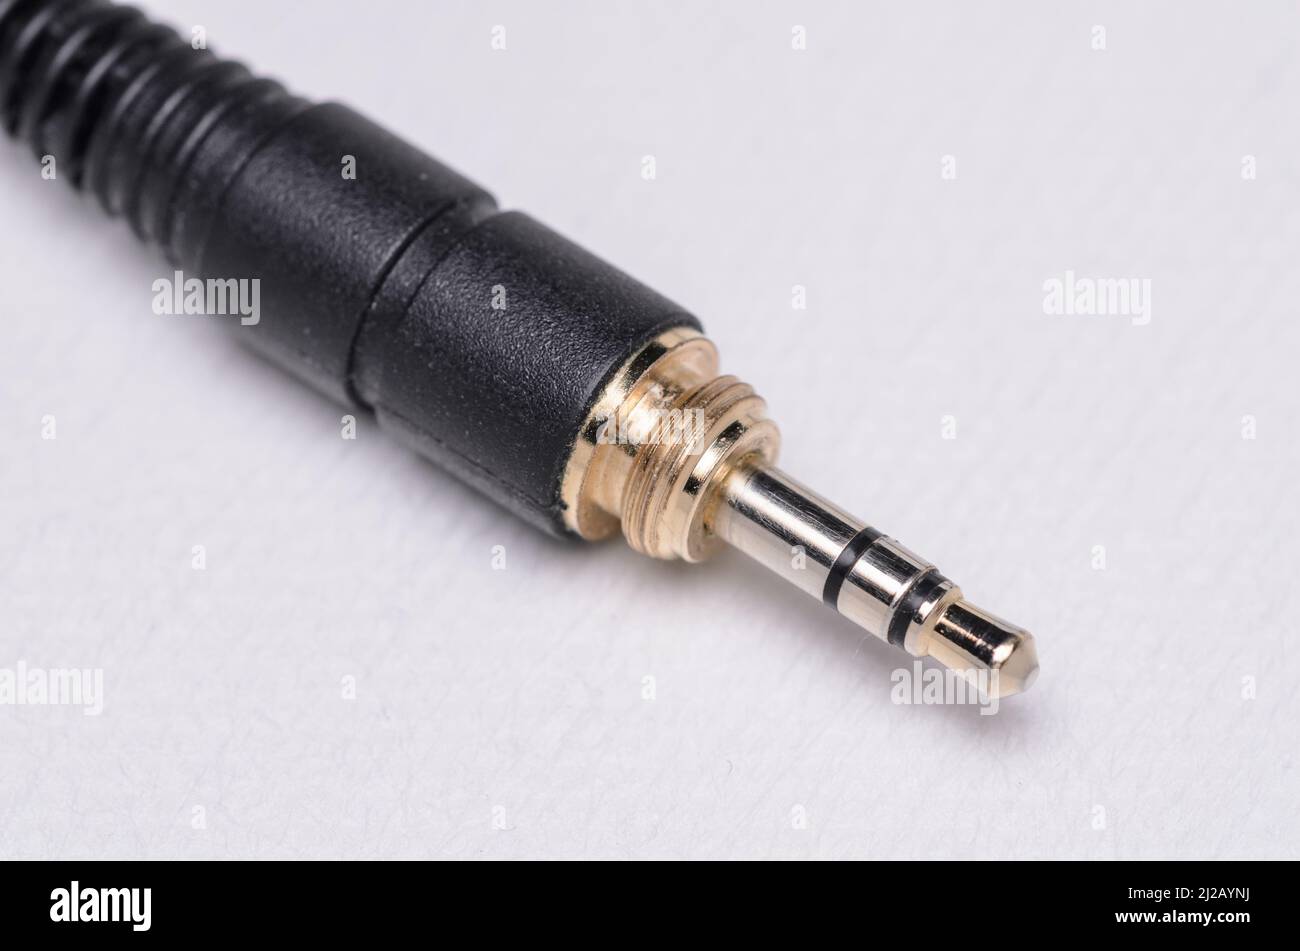 3.5mm stereo headphone jack connector and cable for analog audio signals on white background Stock Photo